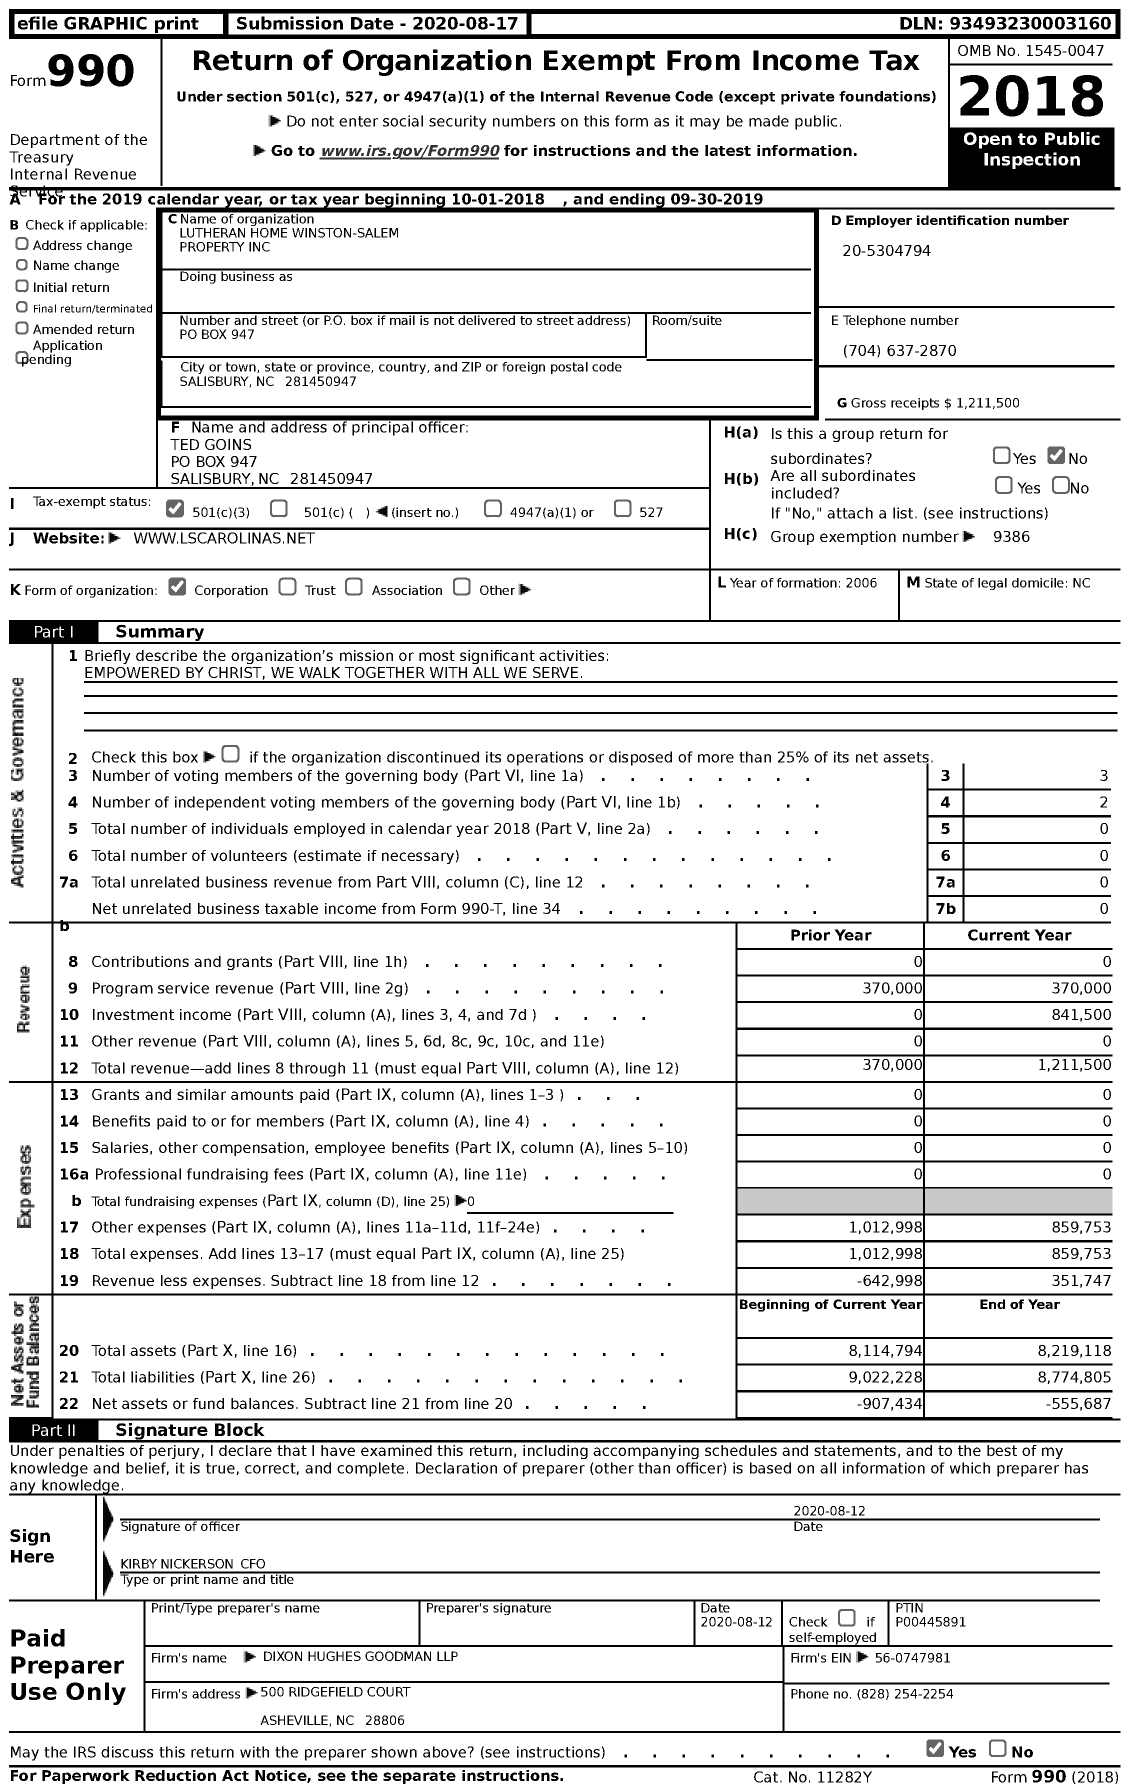 Image of first page of 2018 Form 990 for Lutheran Home Winston-Salem Property